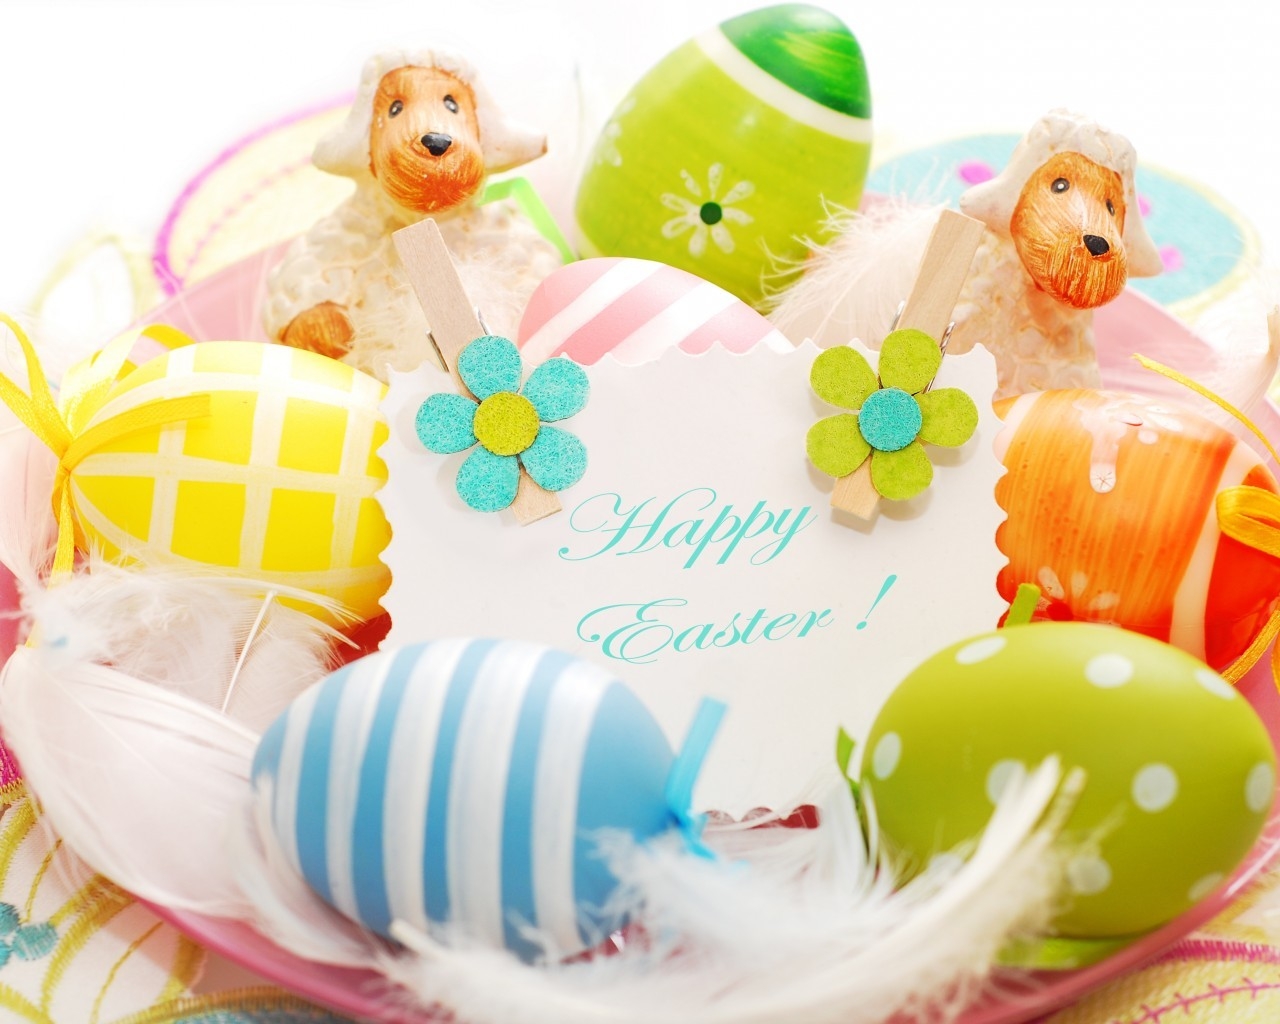 2014 Happy Easter Decorations for 1280 x 1024 resolution